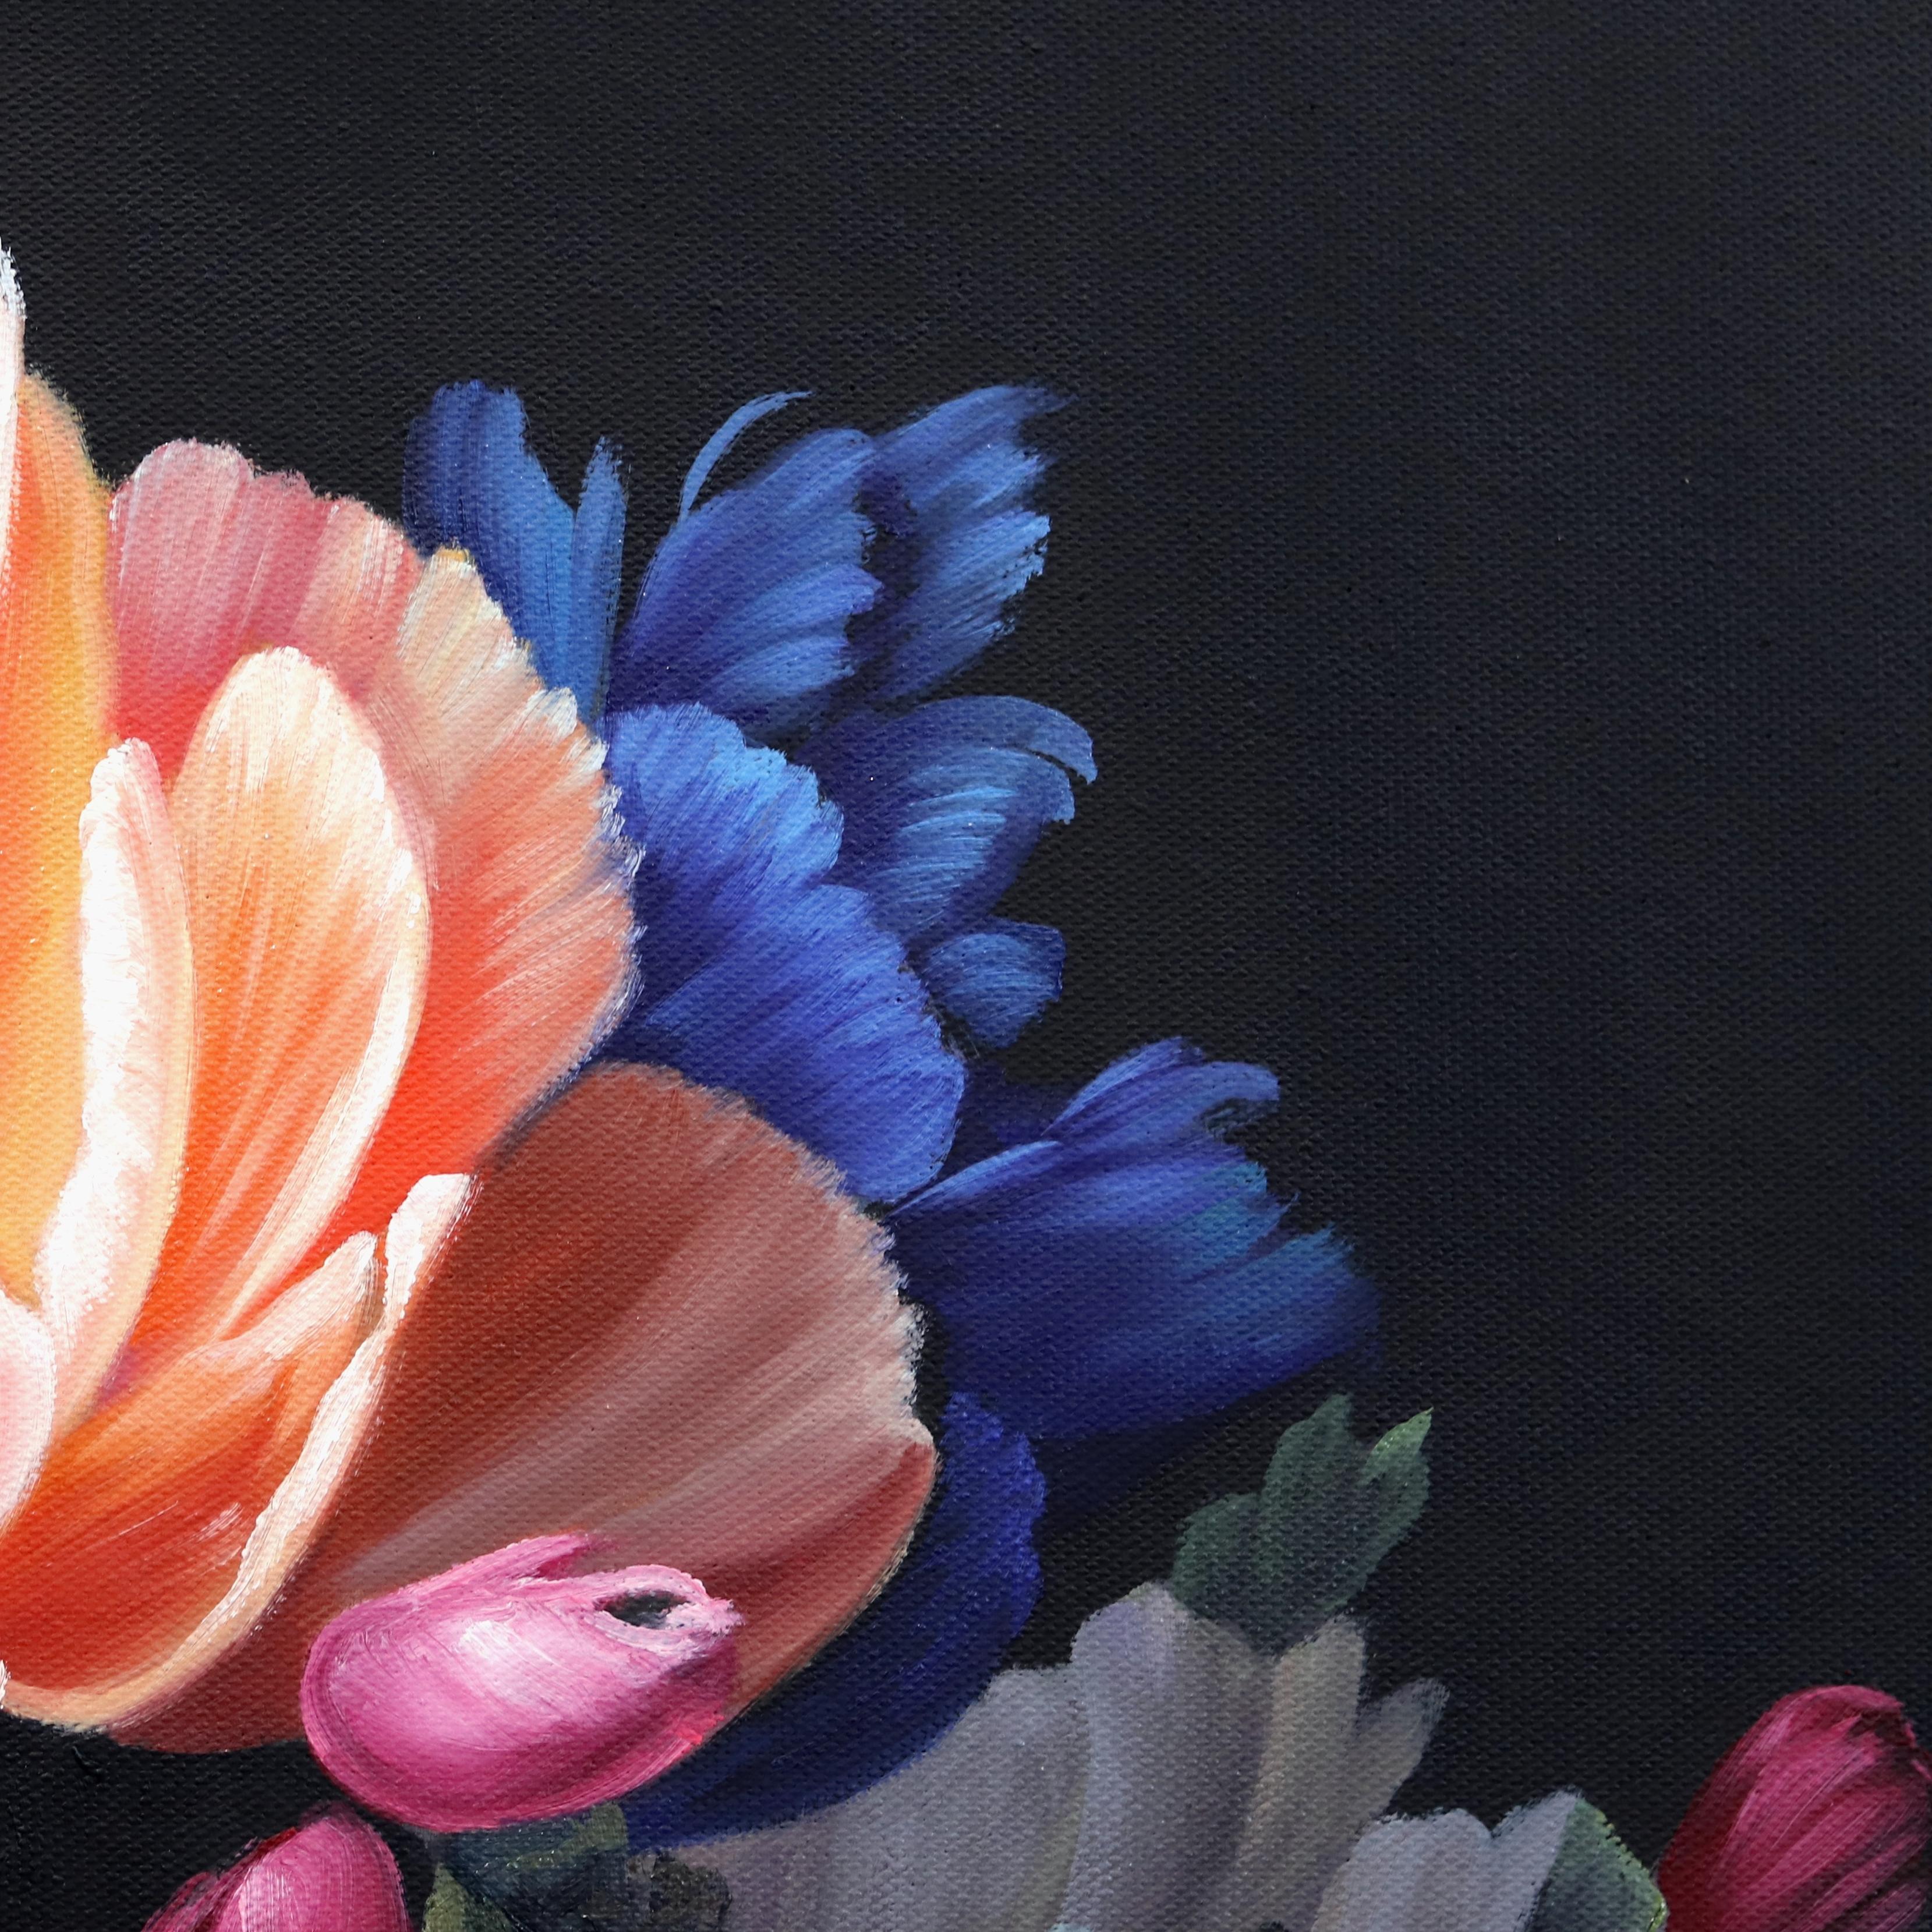 I Have Only My Dreams - Hyperrealist Botanical Floral Still Life Oil Painting 9